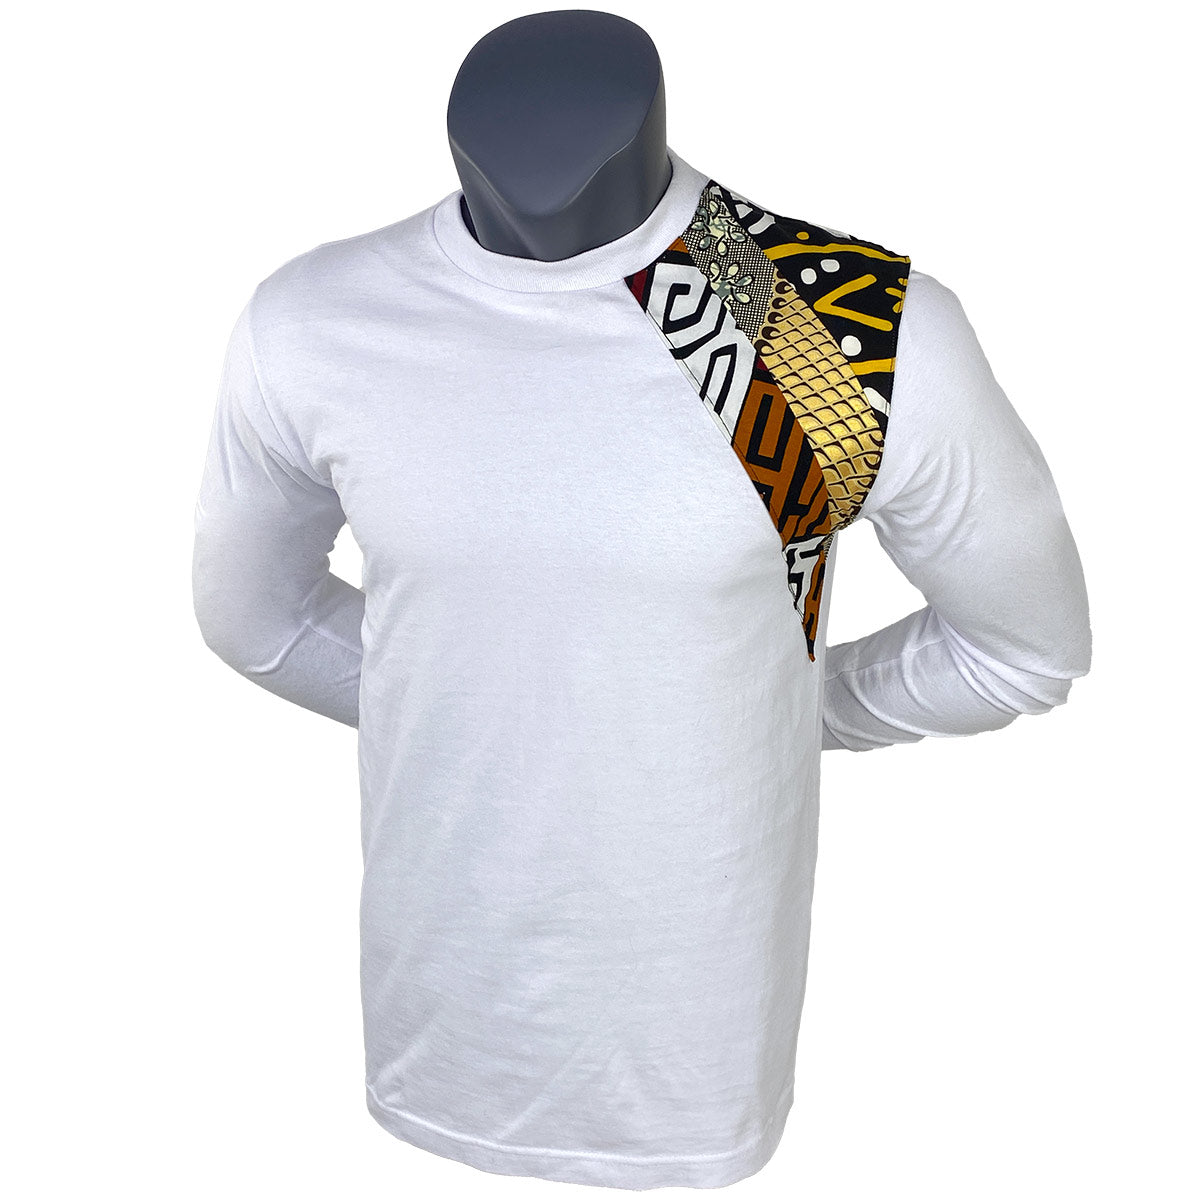 Men's African Print Shoulder Detail T-Shirt | Brown, Yellow, Gold Black Tee | White African T-Shirt | Male / UNISEX  African Shirt |Cloth & Cord